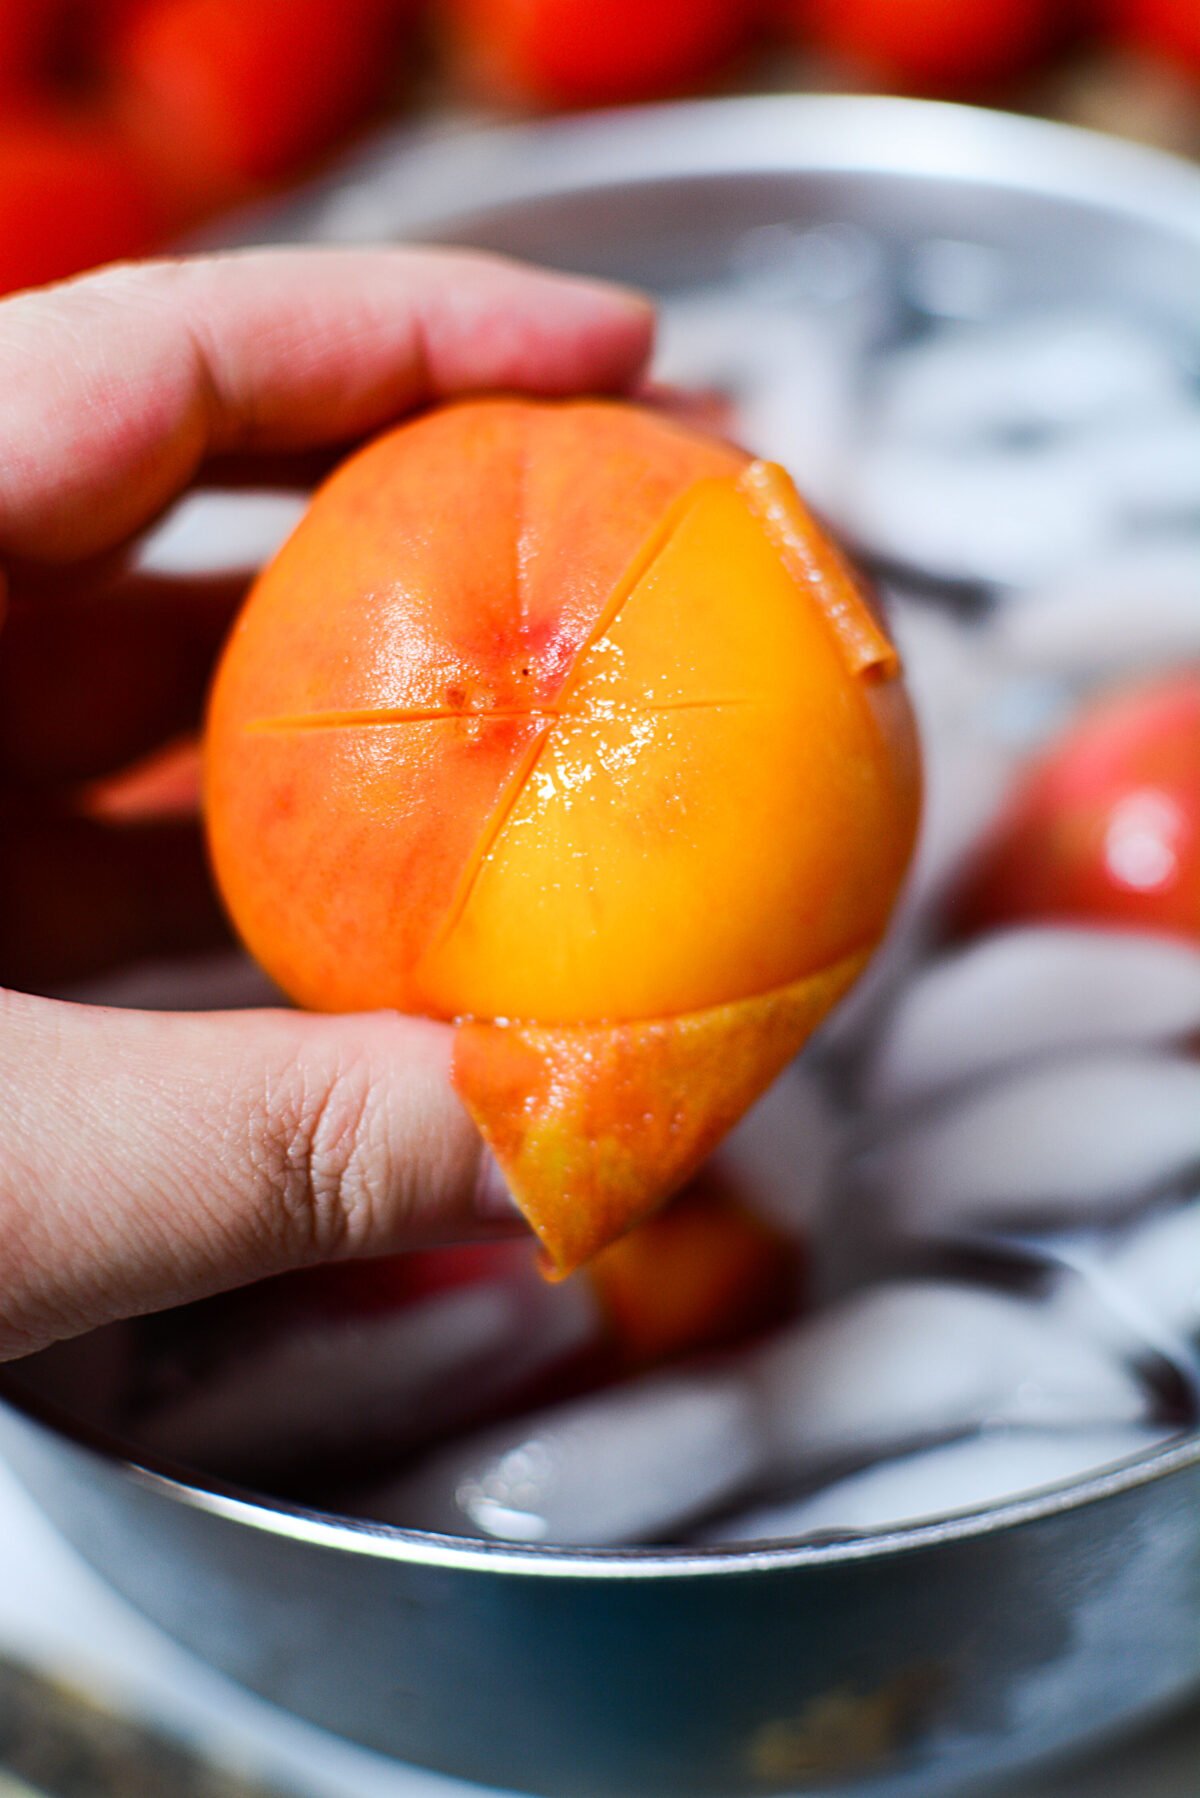 A peach that's being peeled after having been blanched.